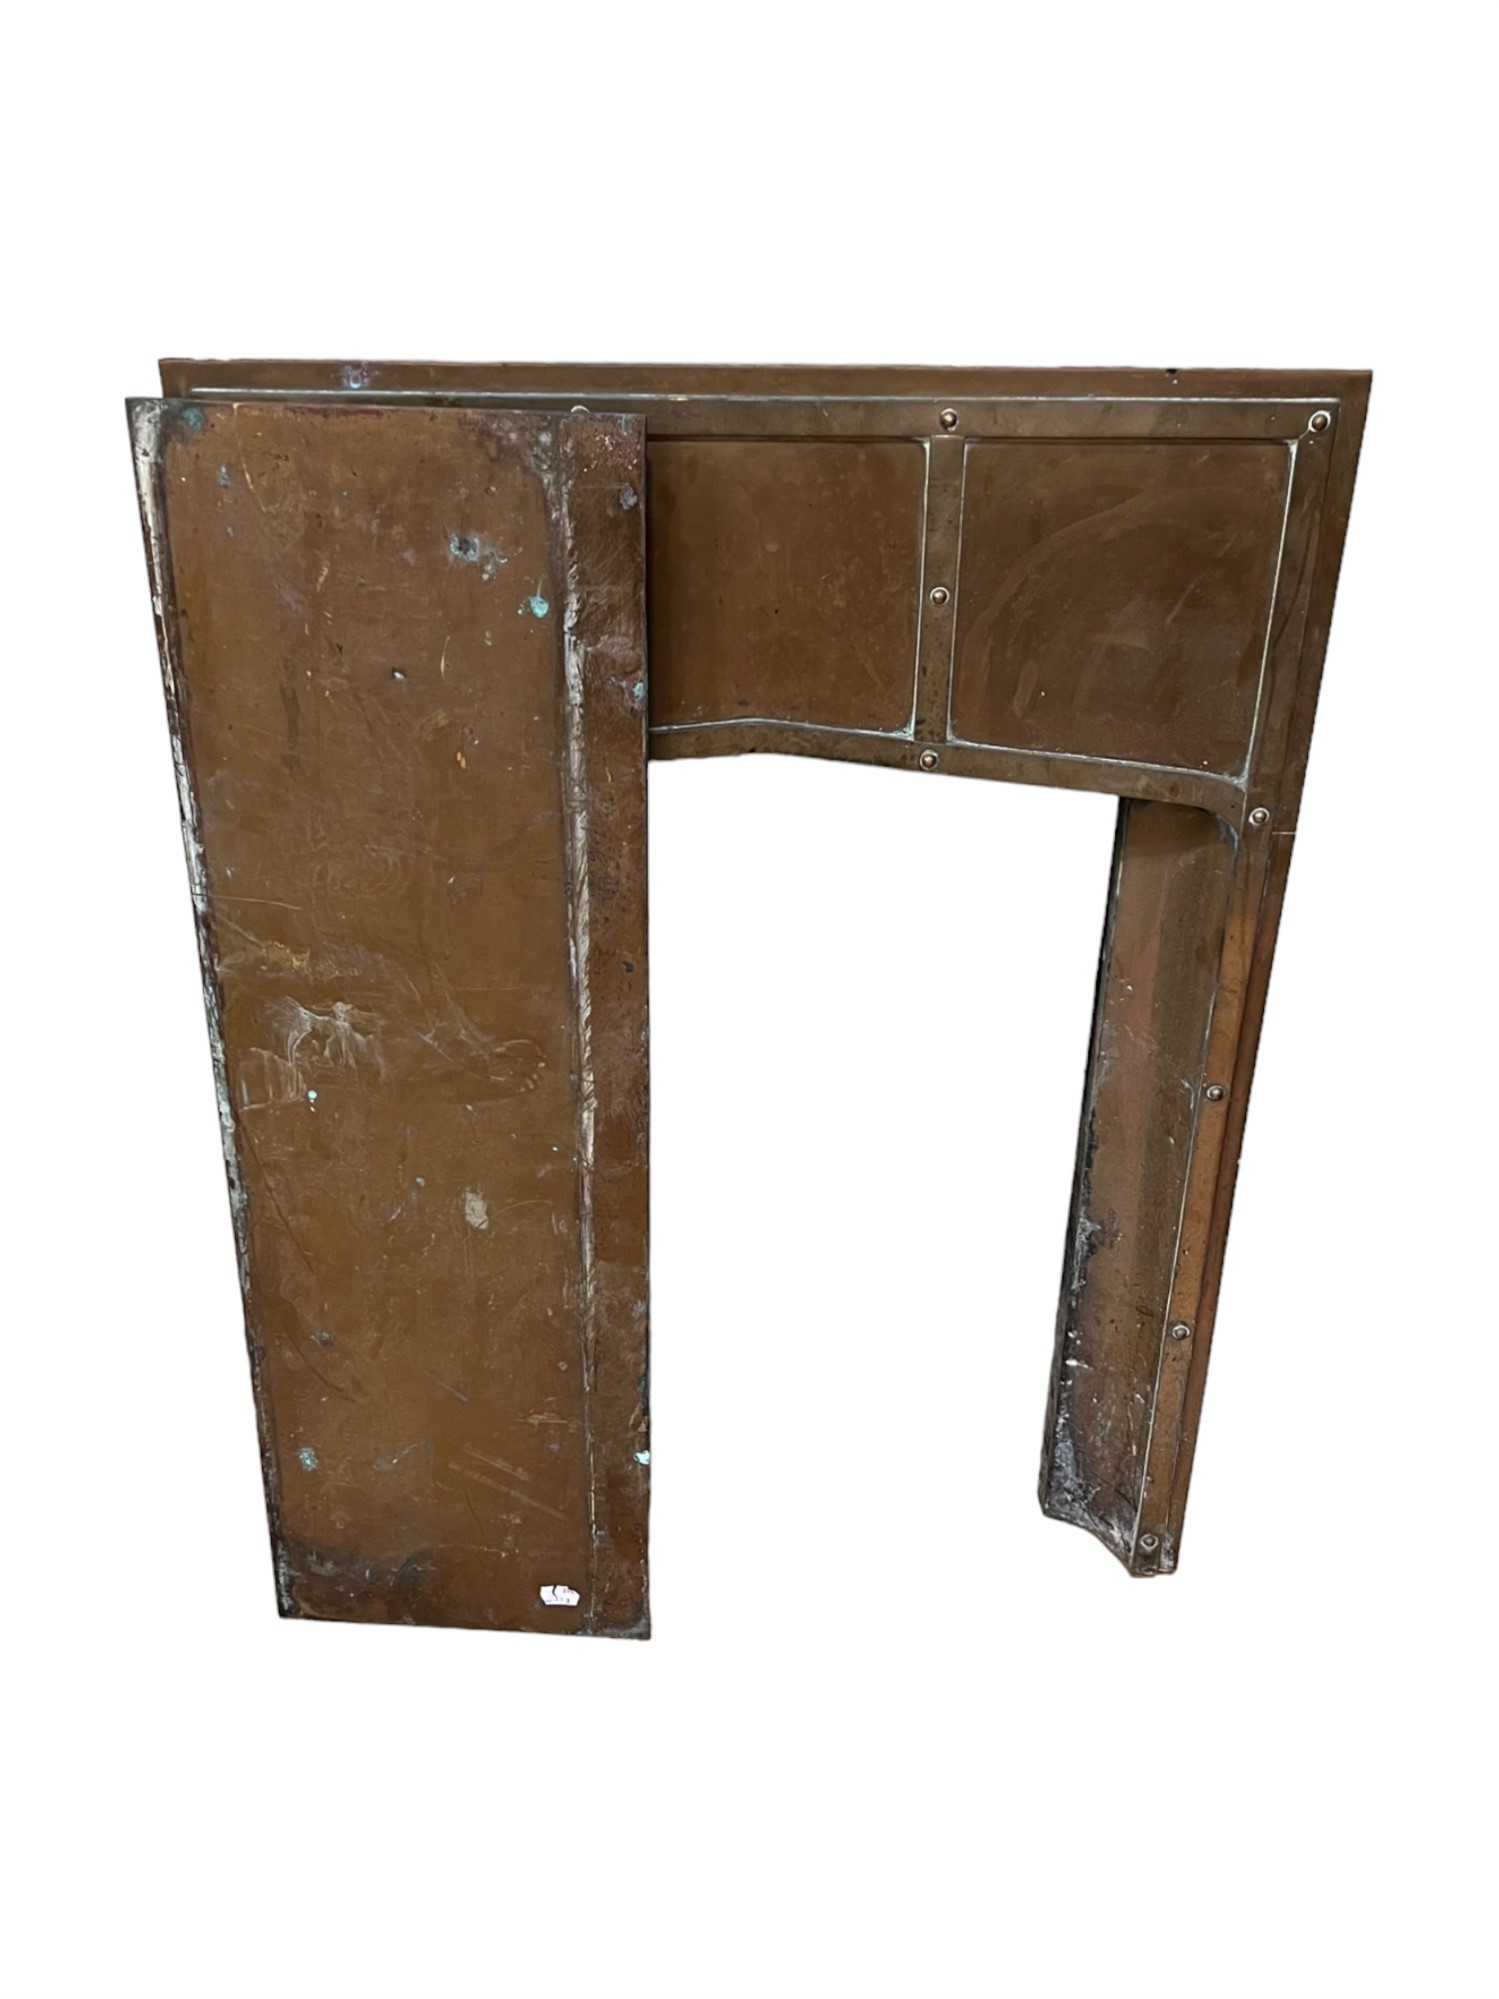 An early 20th Century Arts and Crafts brass hearth / mantelpiece insert, 63 x 87 cm - Image 4 of 5